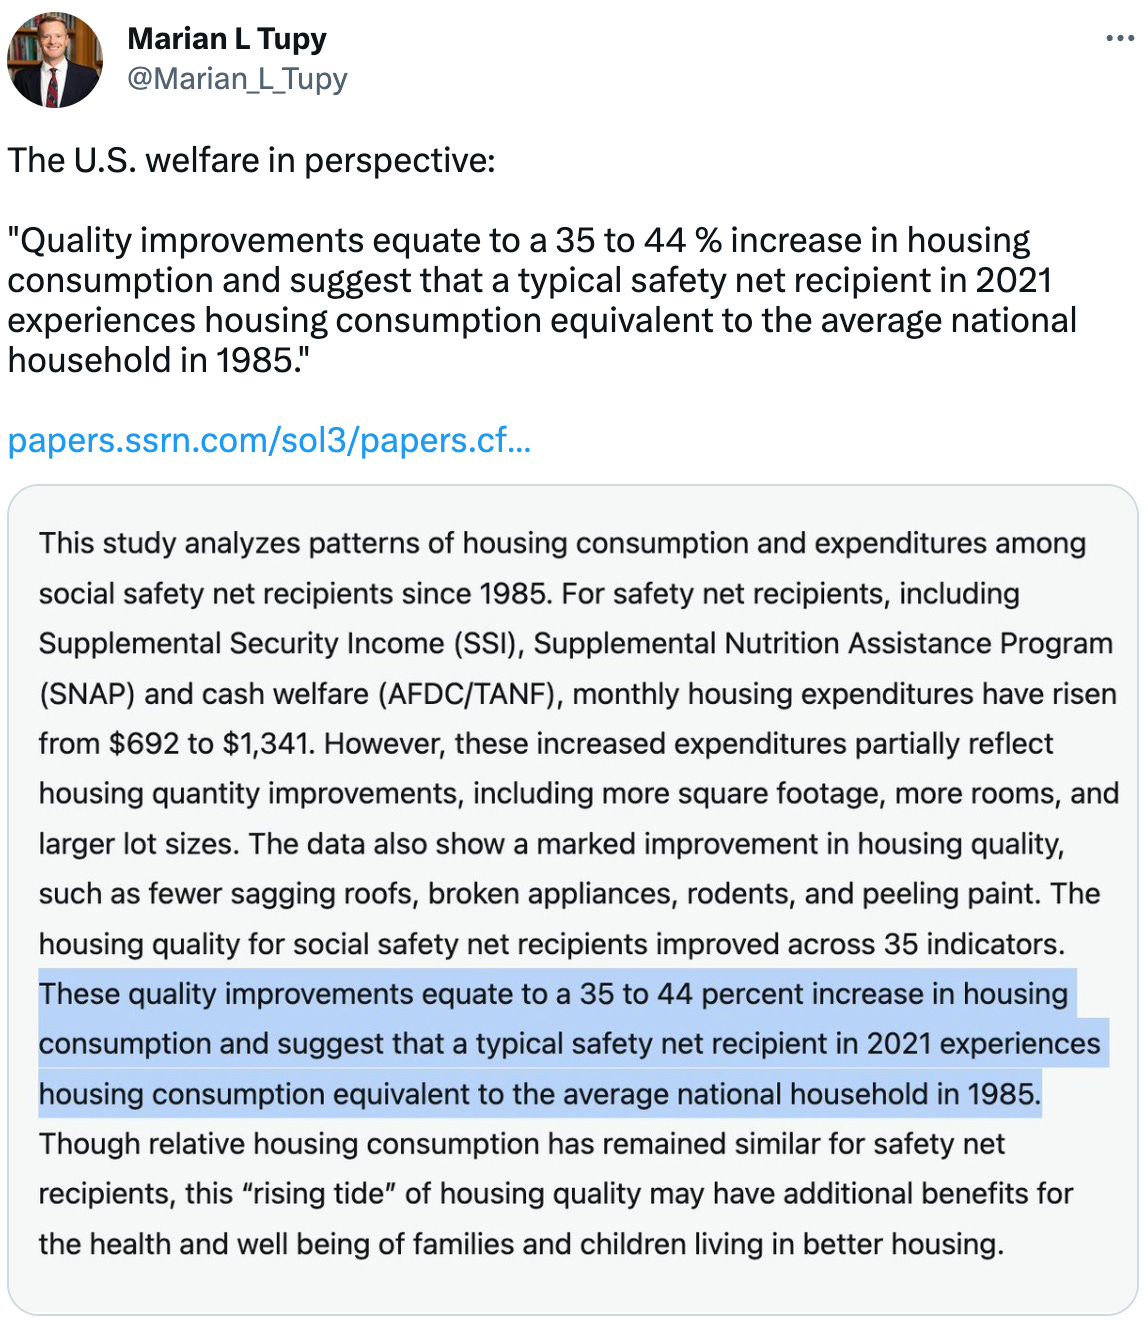 See new Tweets Conversation Marian L Tupy @Marian_L_Tupy The U.S. welfare in perspective:  "Quality improvements equate to a 35 to 44 % increase in housing consumption and suggest that a typical safety net recipient in 2021 experiences housing consumption equivalent to the average national household in 1985."  https://papers.ssrn.com/sol3/papers.cfm?abstract_id=4424681